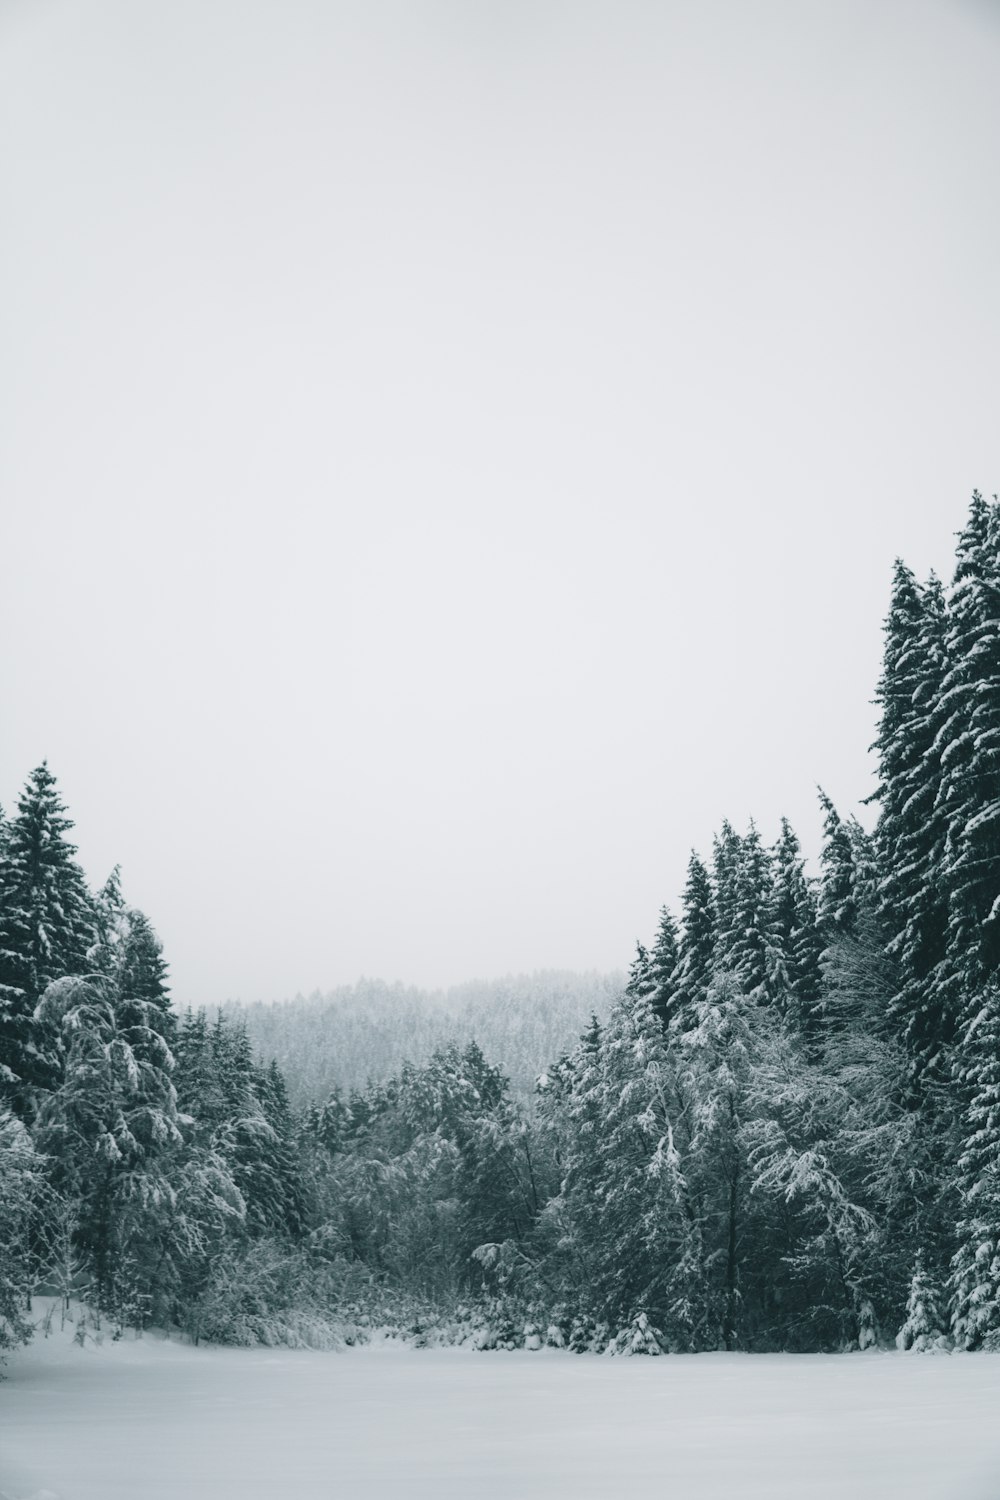 snow covering mountain slope lined with pine trees